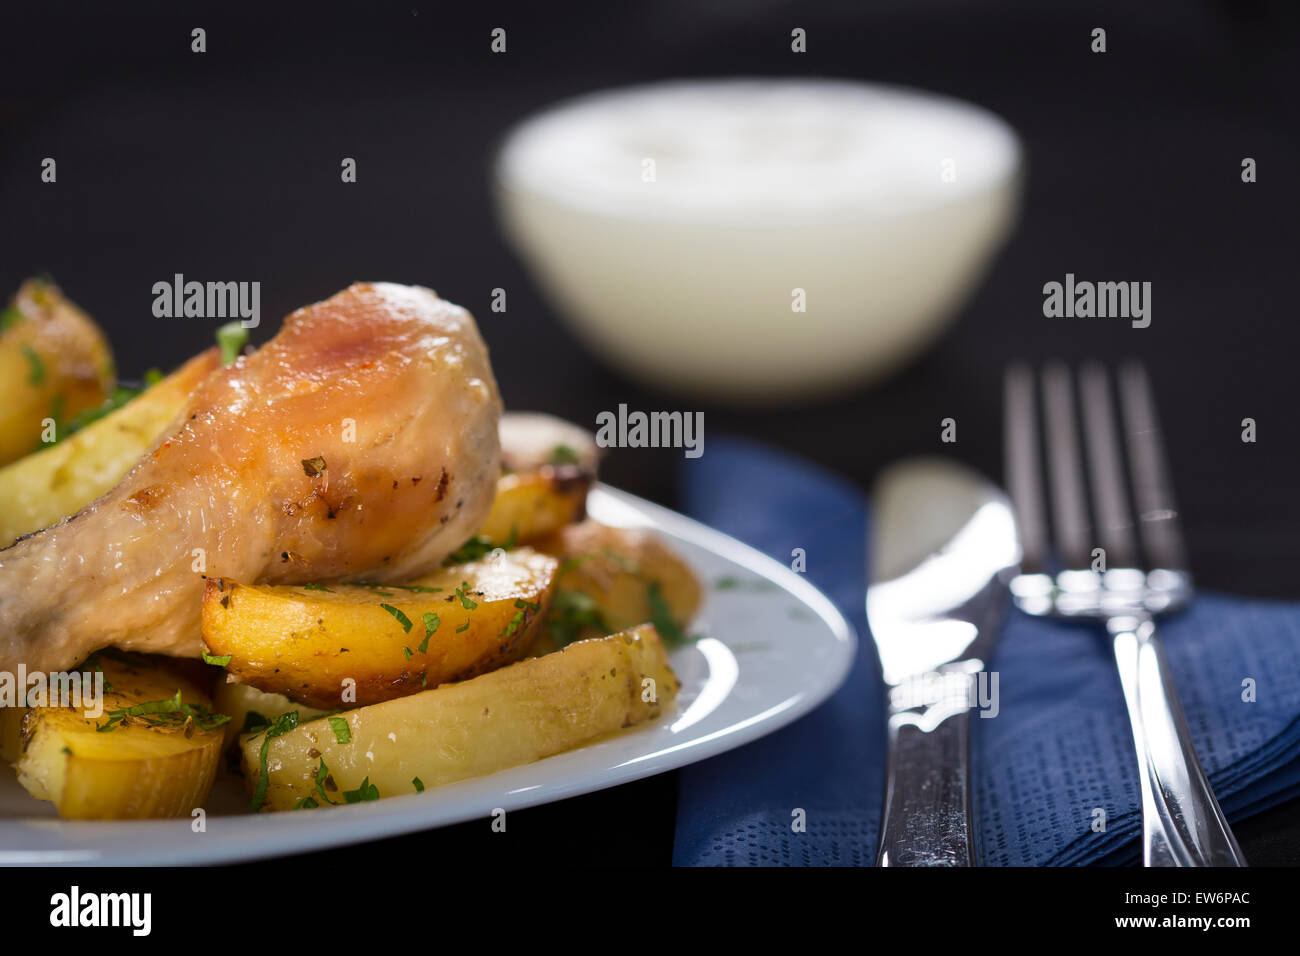 Baked potatoes with roasted chicken drumstick on white plate Stock Photo